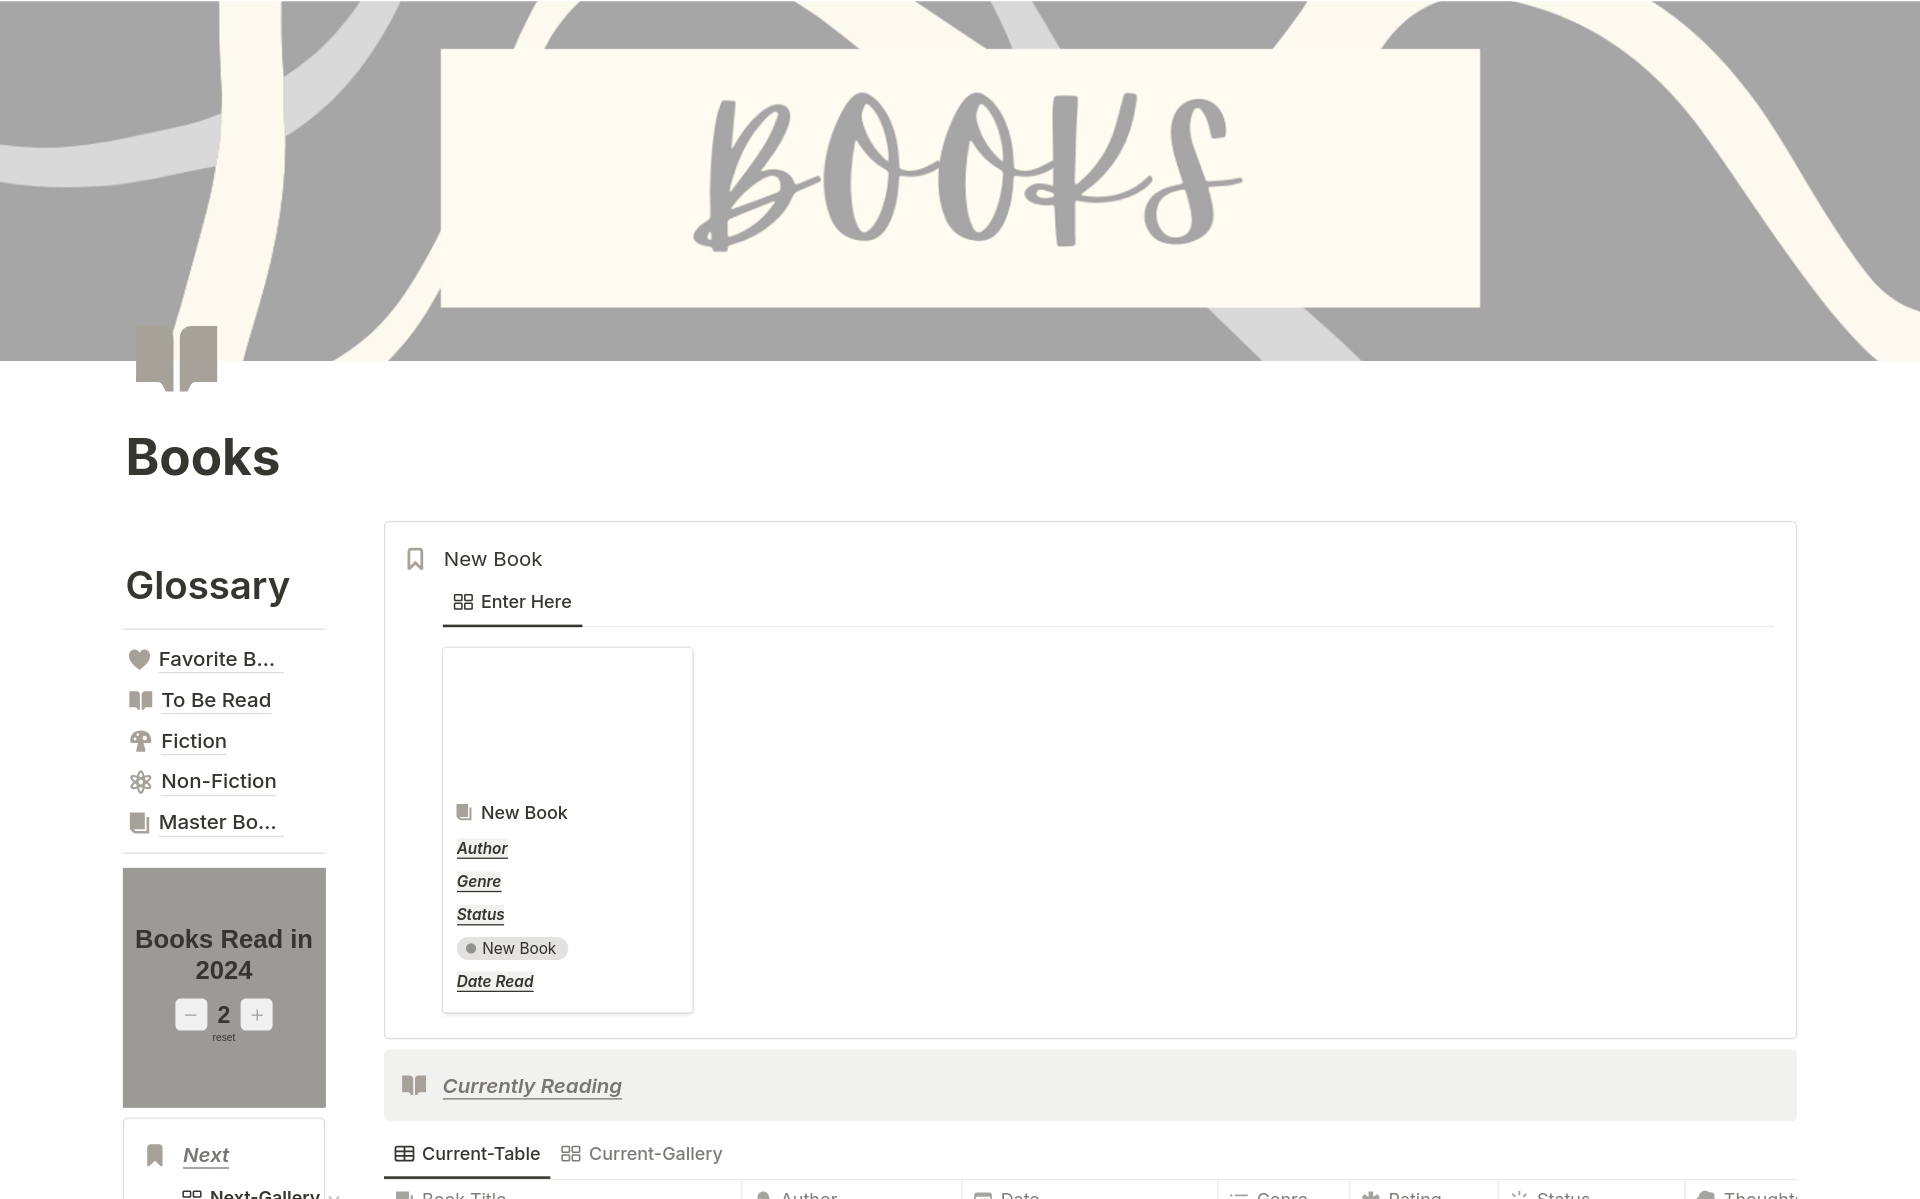 This bookshelf will help you keep track of all books you have read.  Categorize them by fiction, non-fiction, to be read, and your favorite books.  